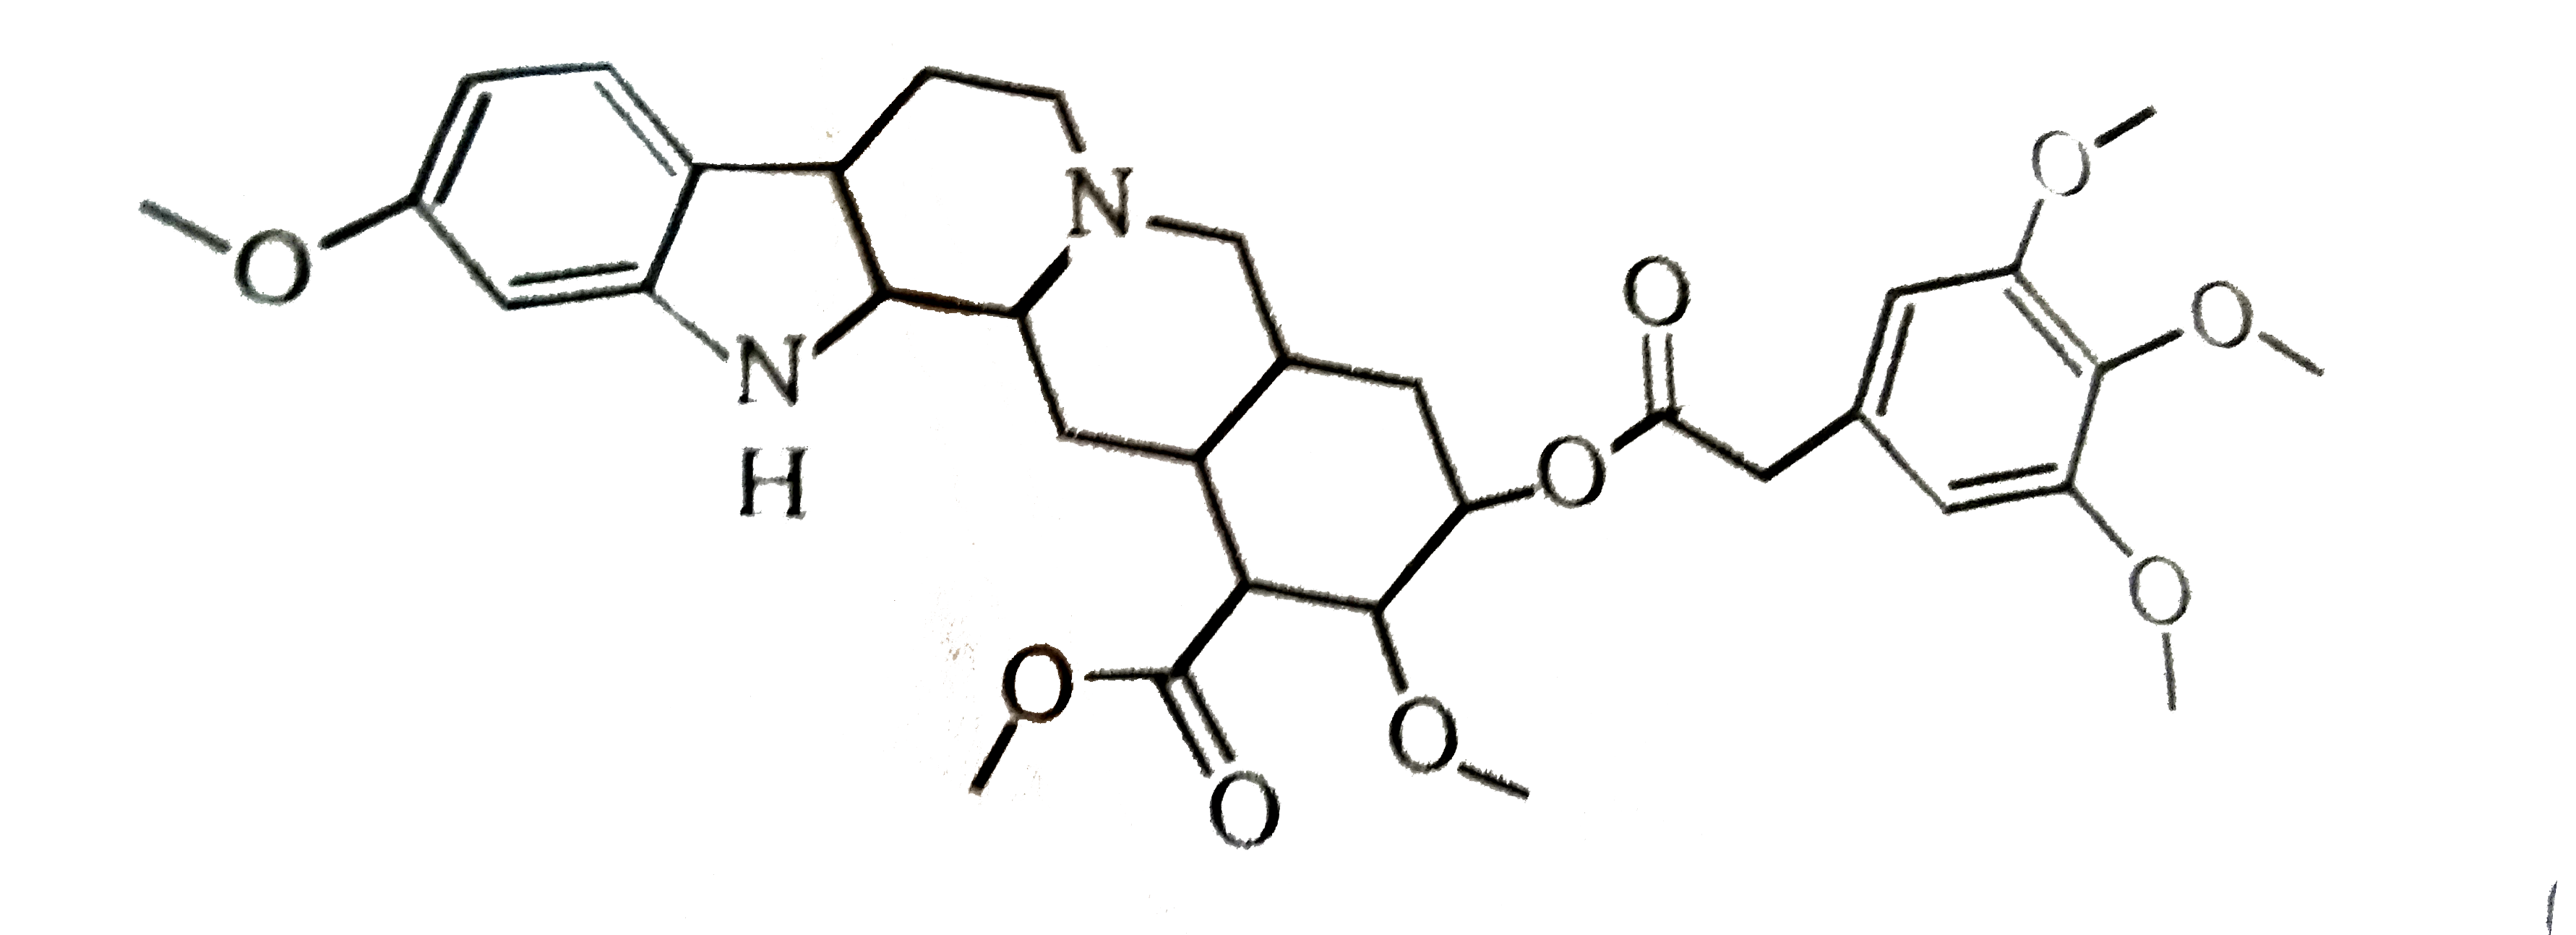 How many chiral carbons are therre in Reserpine (an antipsychotic durg) ?